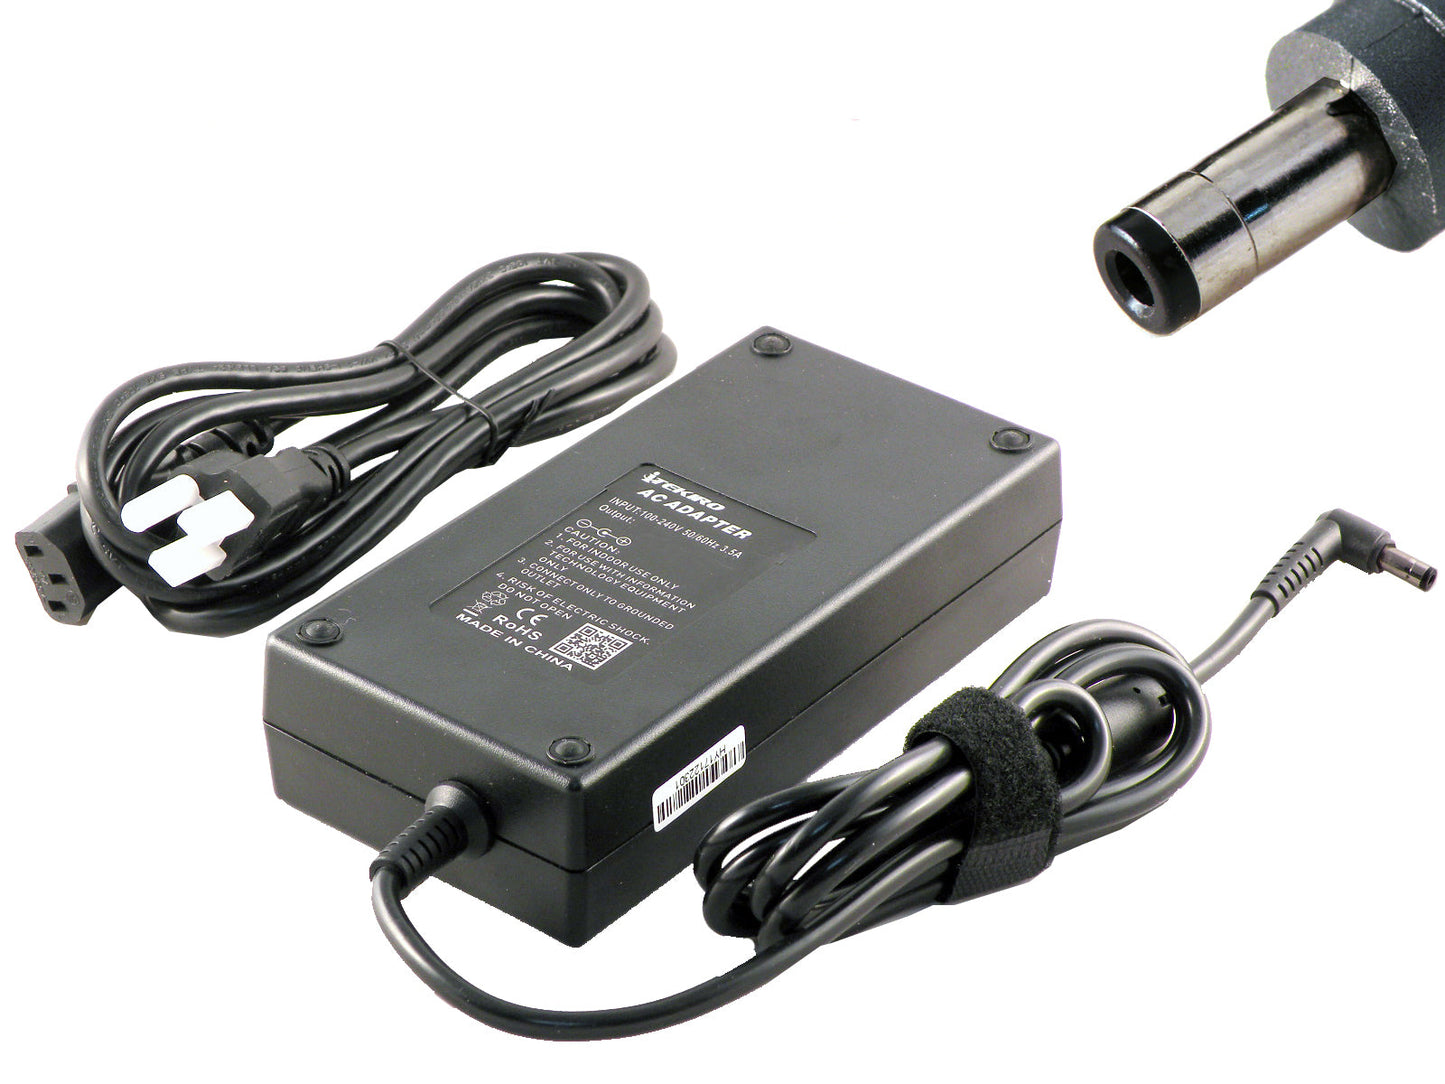 Picture of the adapter with its DC plug tip